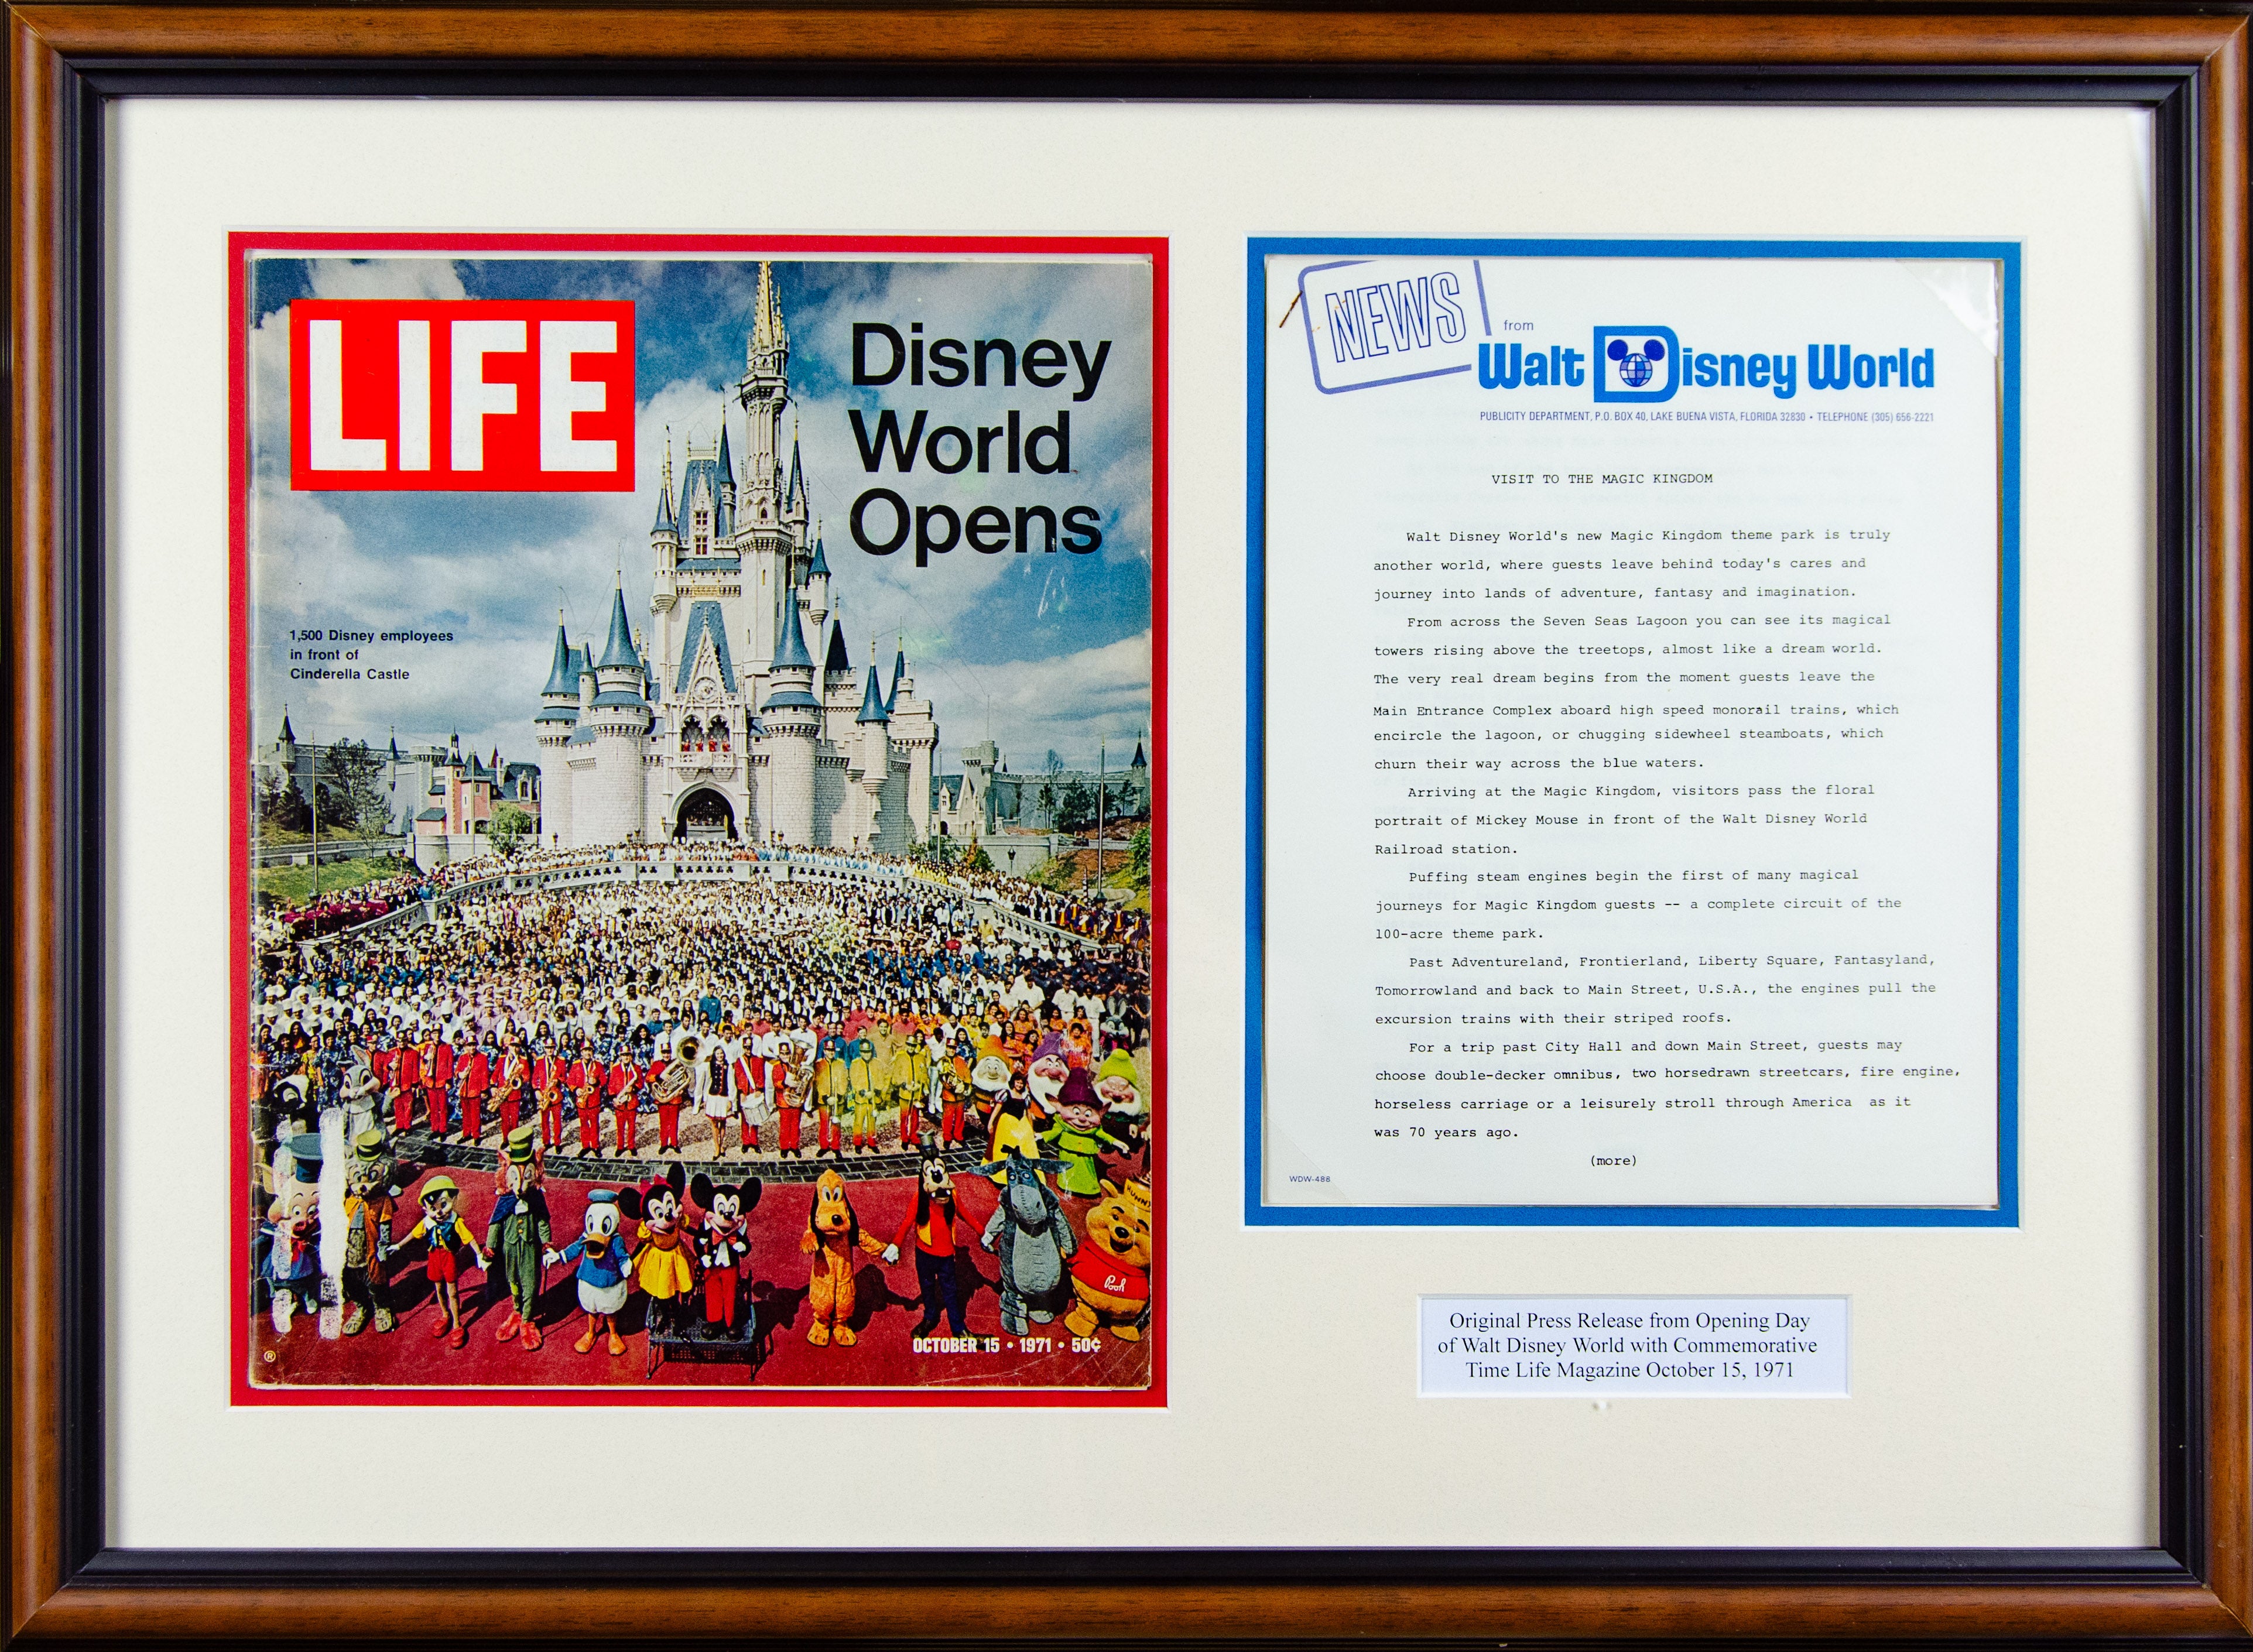 Original Press Release from Opening Day of Walt Disney World With Commemorative Time Life Magazine